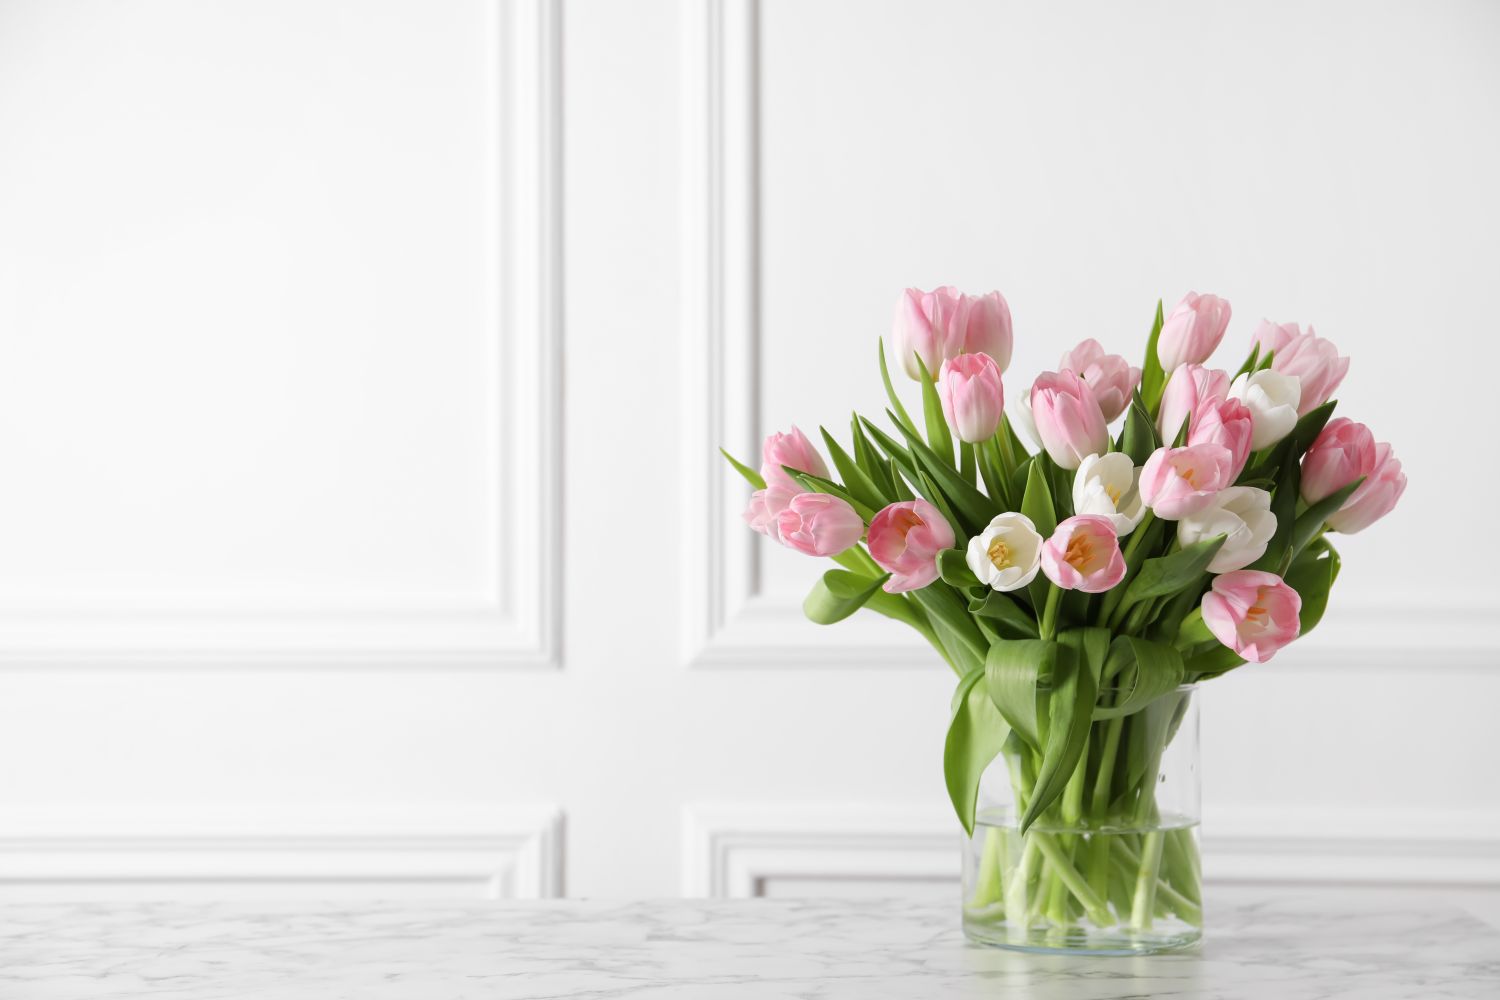 The best tips for tulips in a vase - Plantura